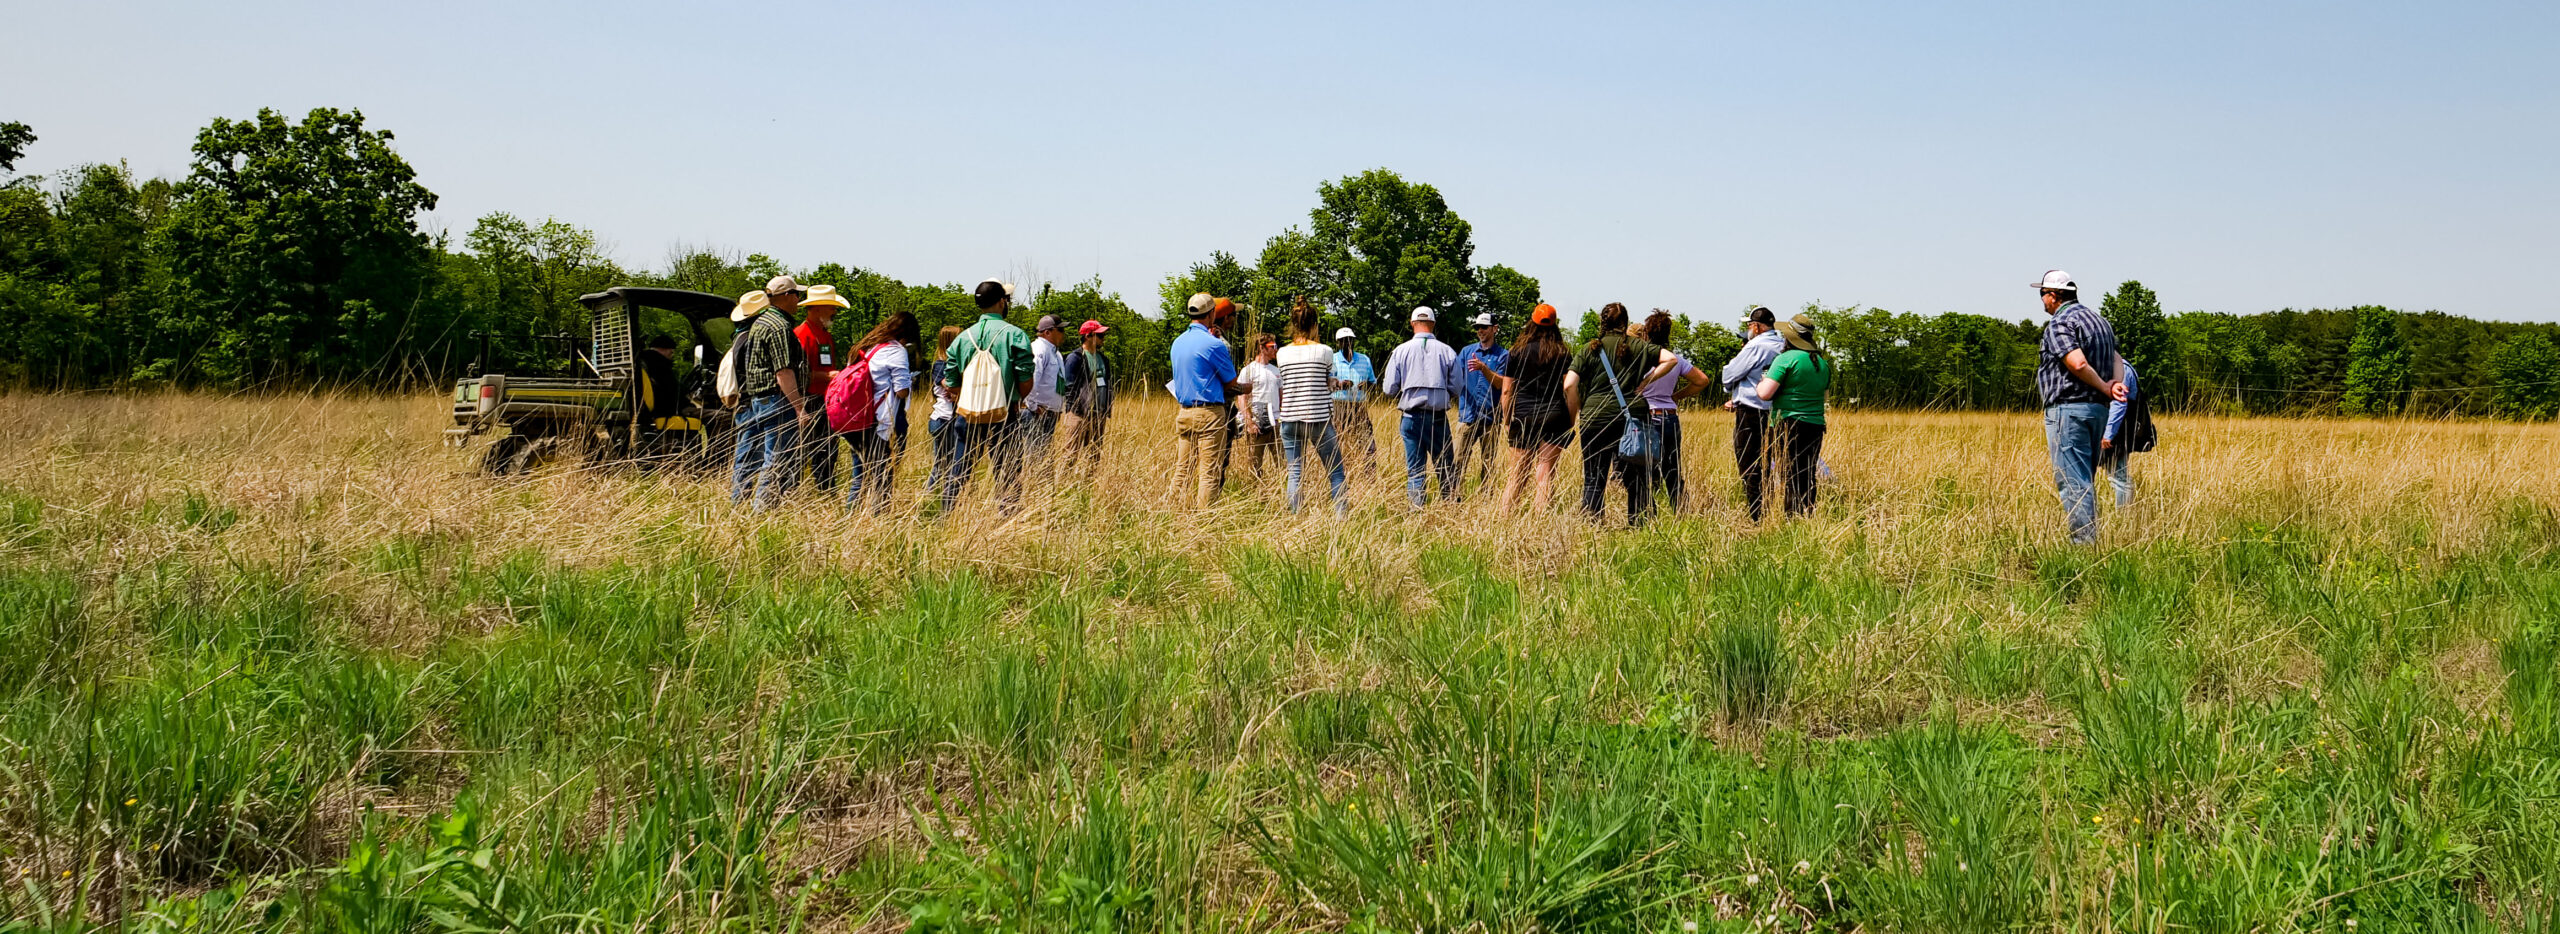 International Grasslands Congress attendees (about 20 individuals total) visiting Greenacres, standing in pasture having a group discussion